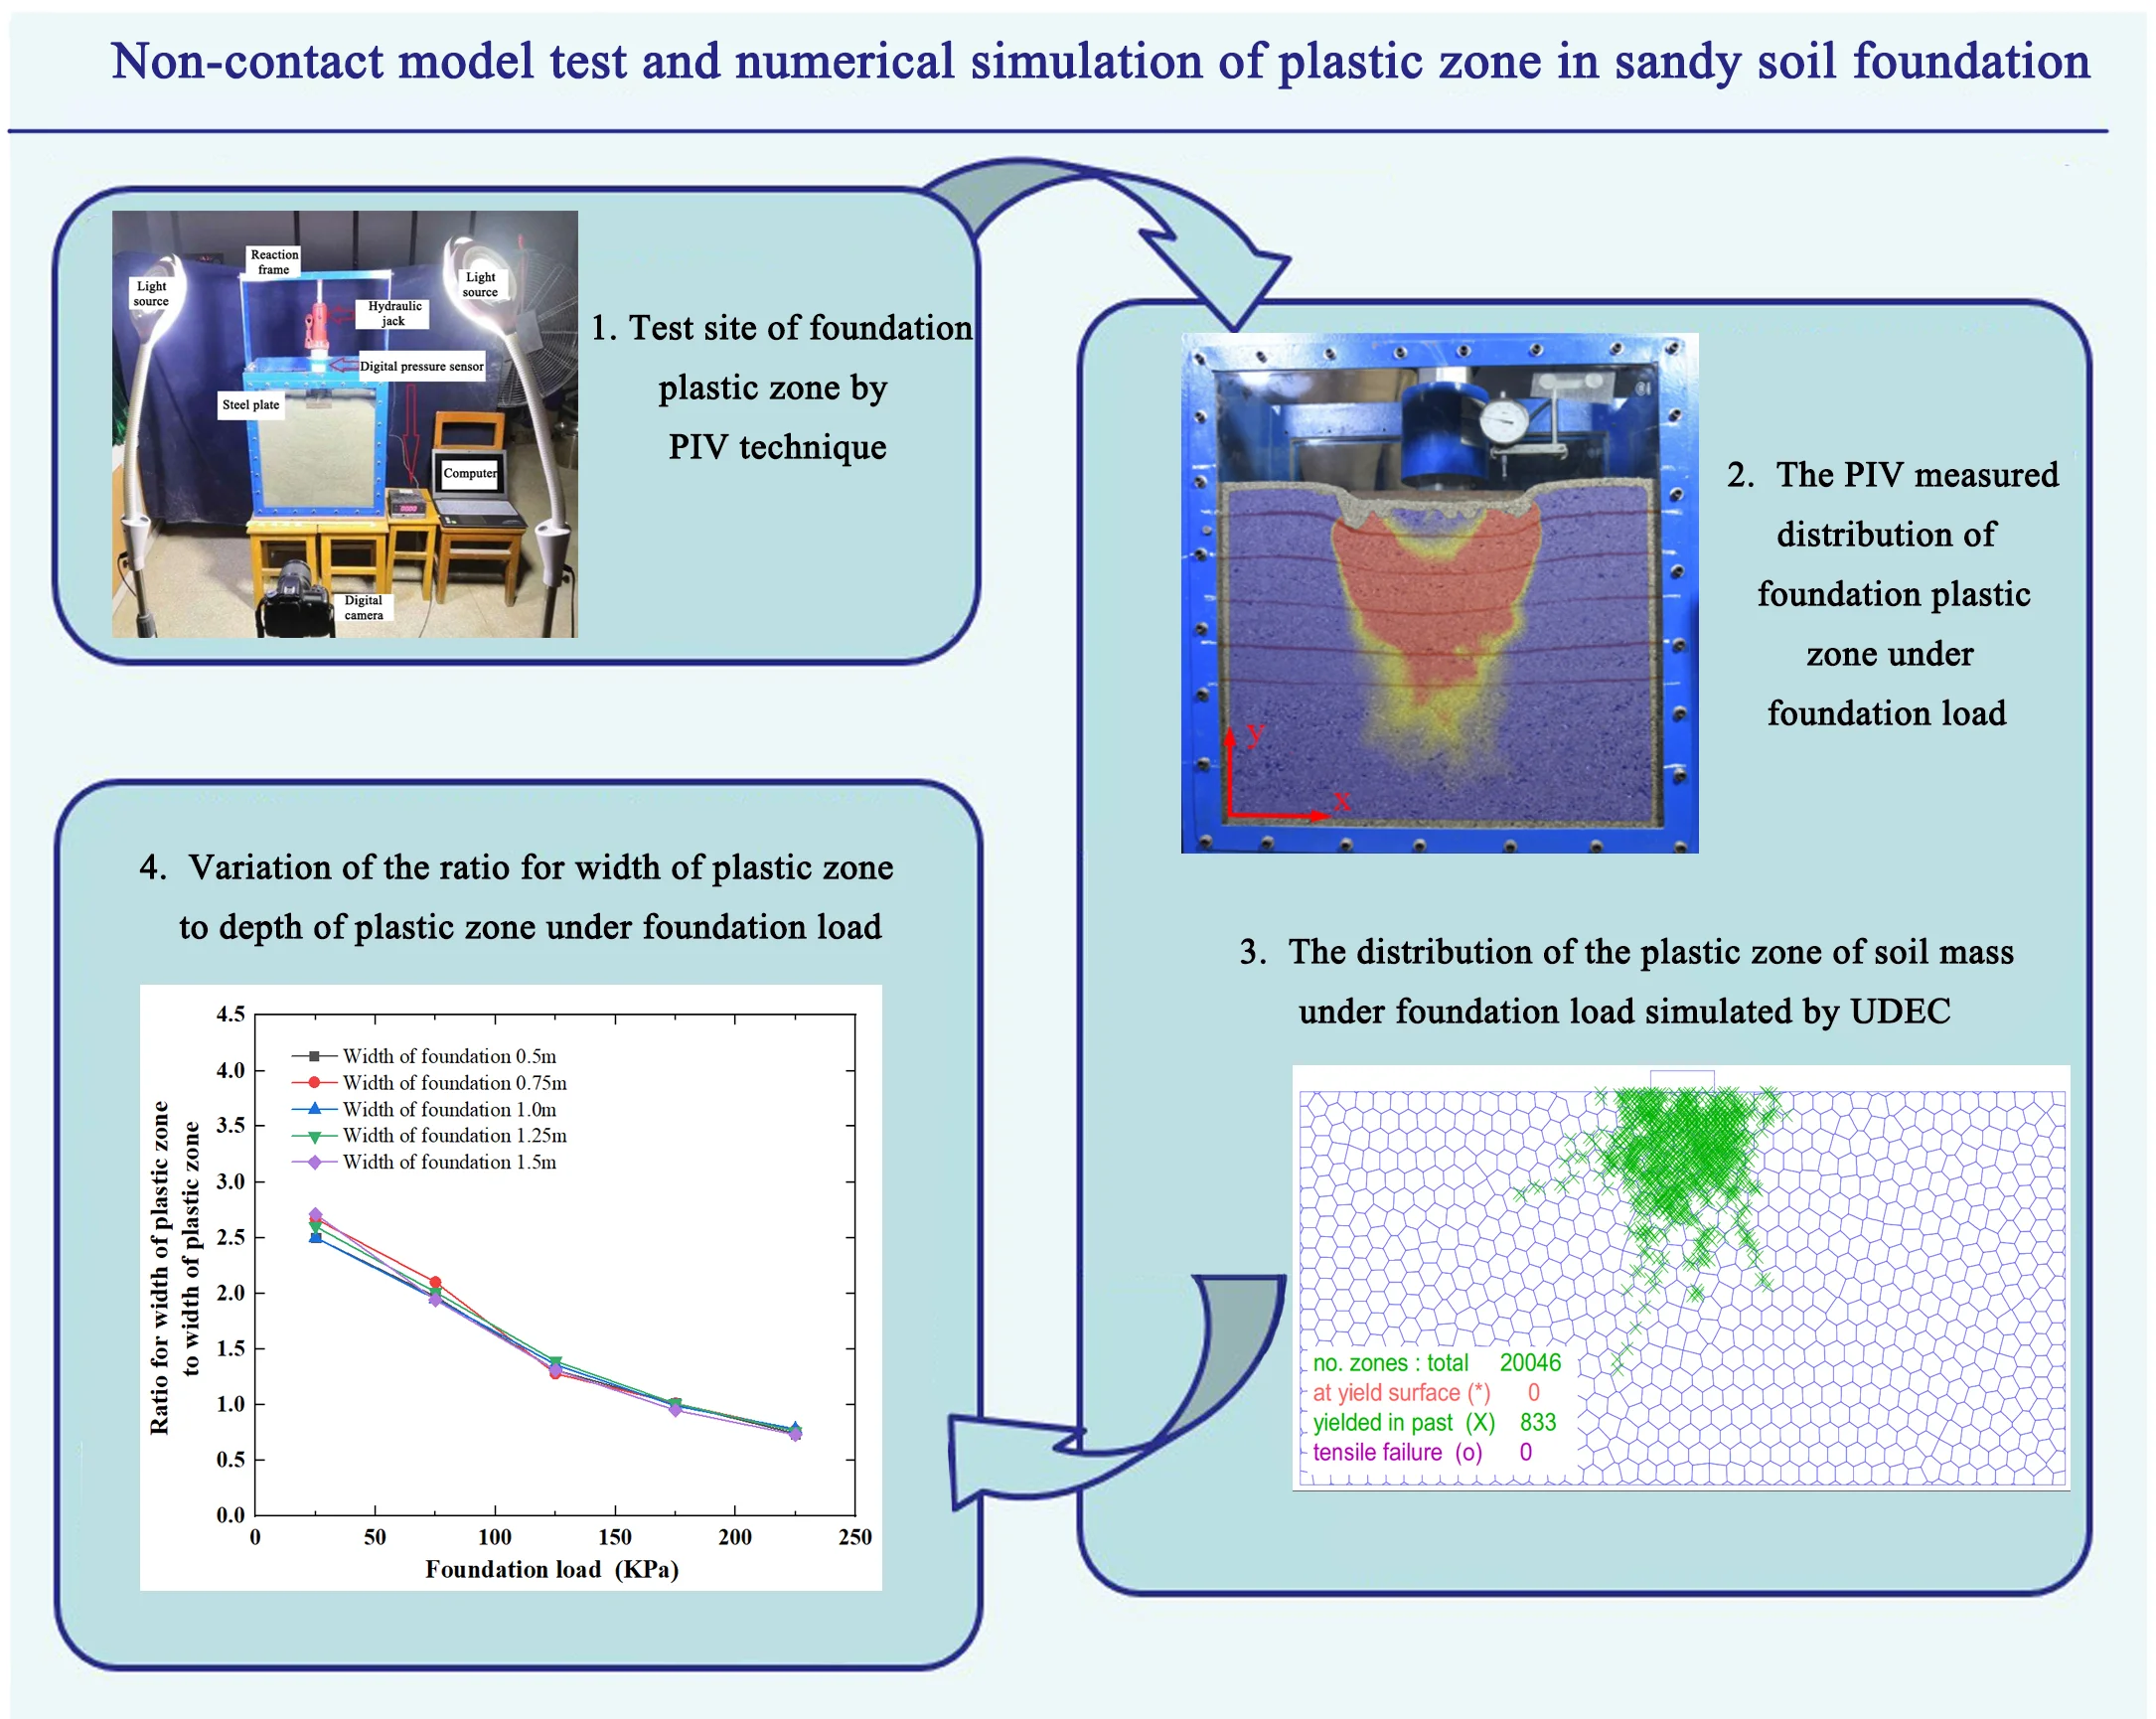 Non-contact model test and numerical simulation of plastic zone in sandy soil foundation